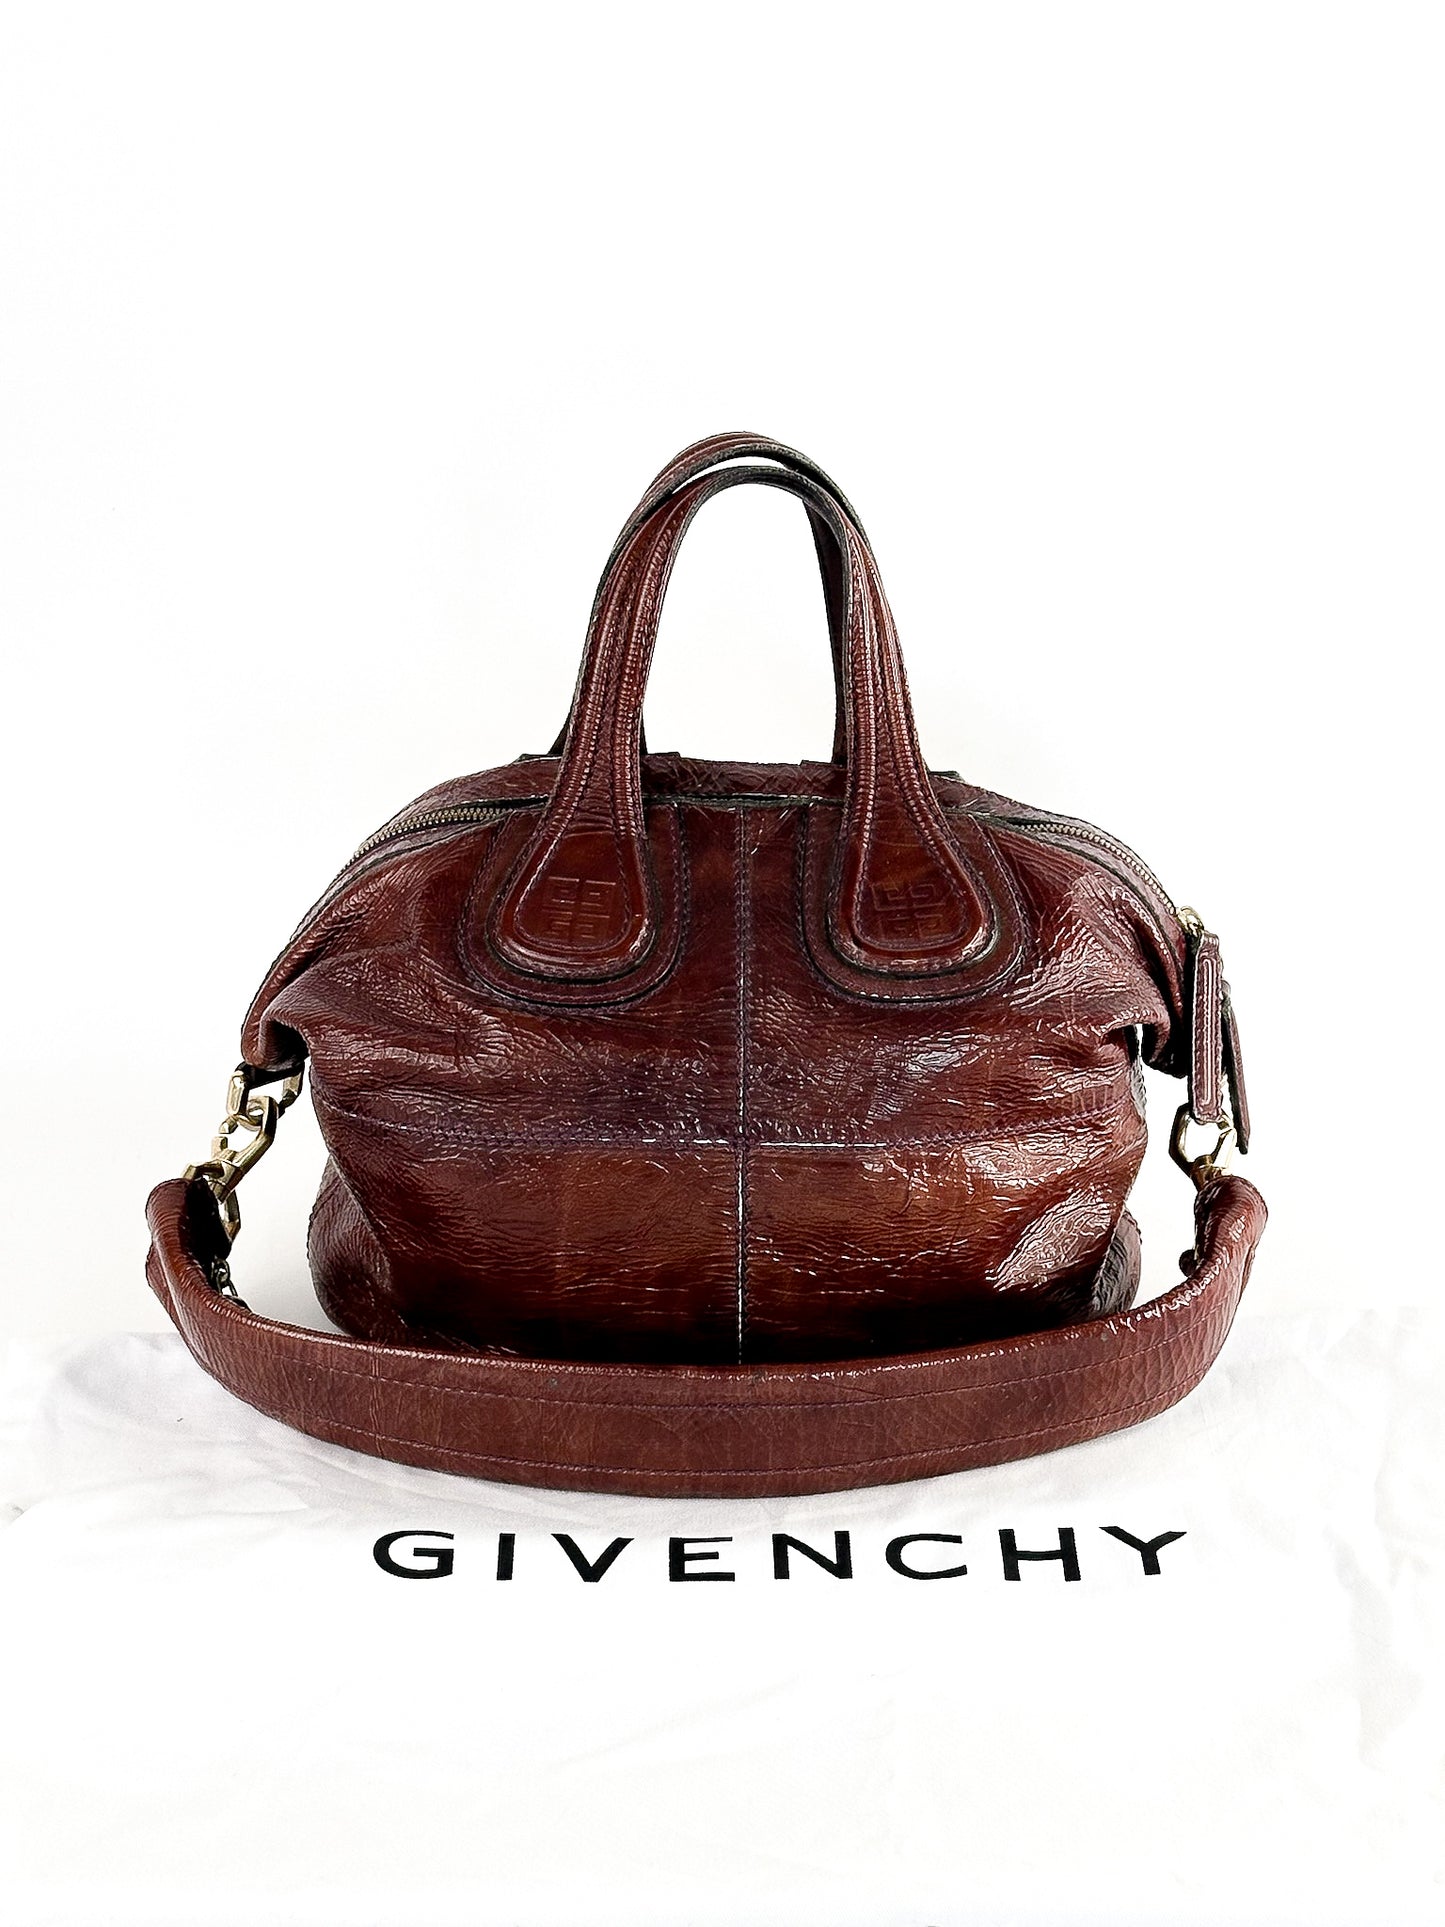 Givenchy Nightingale Patent Leather